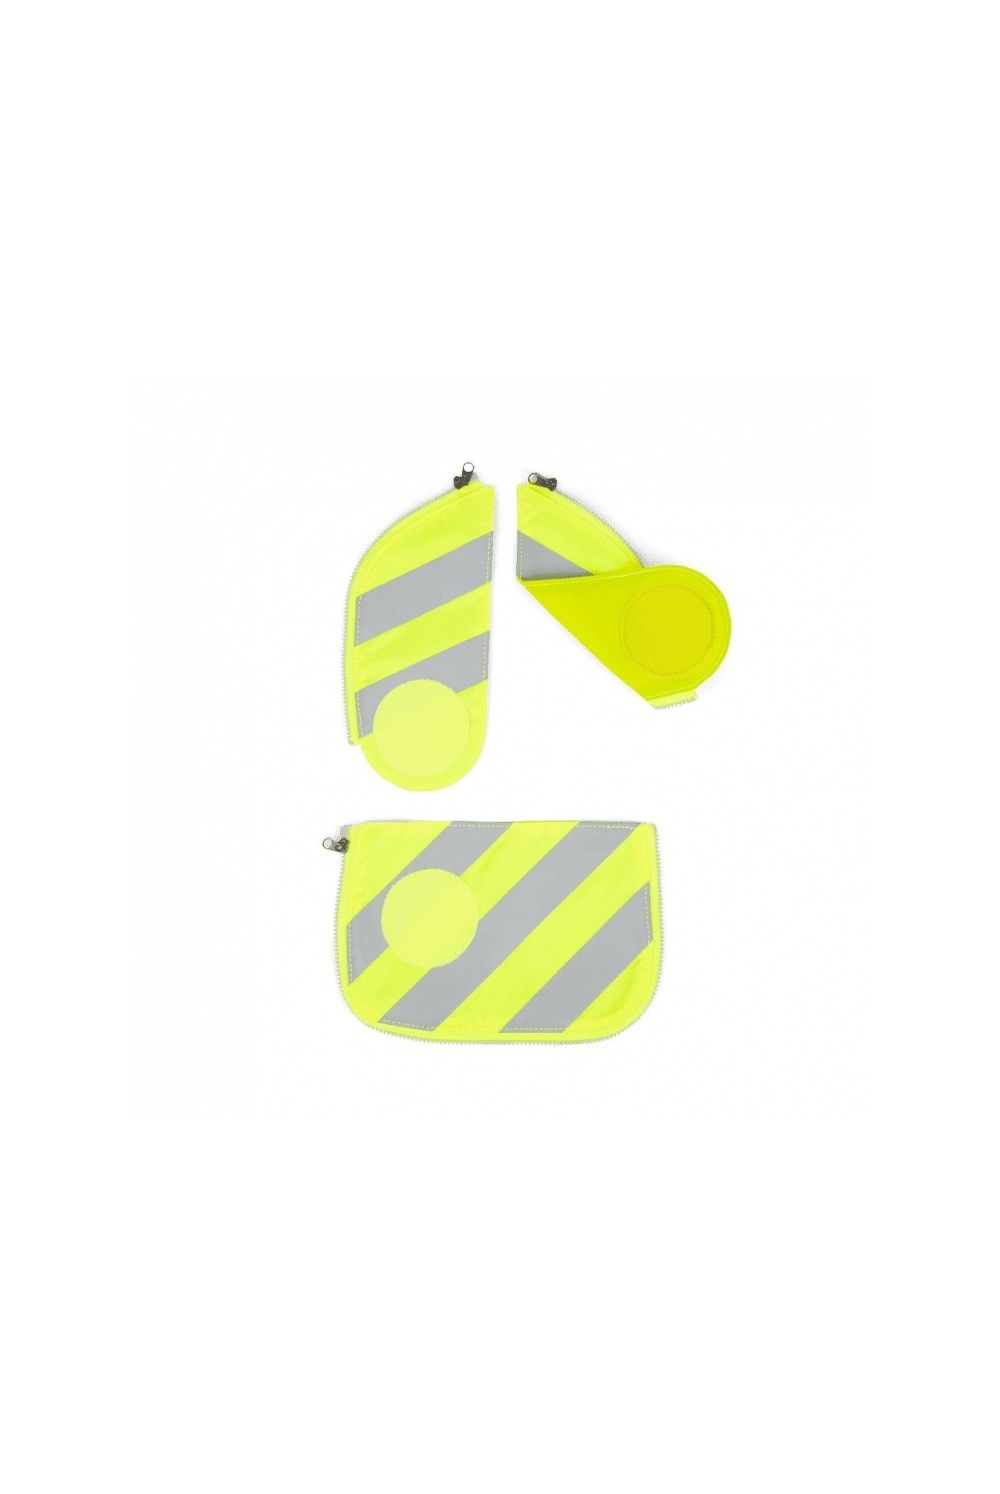 ergobag safety set with reflector yellow